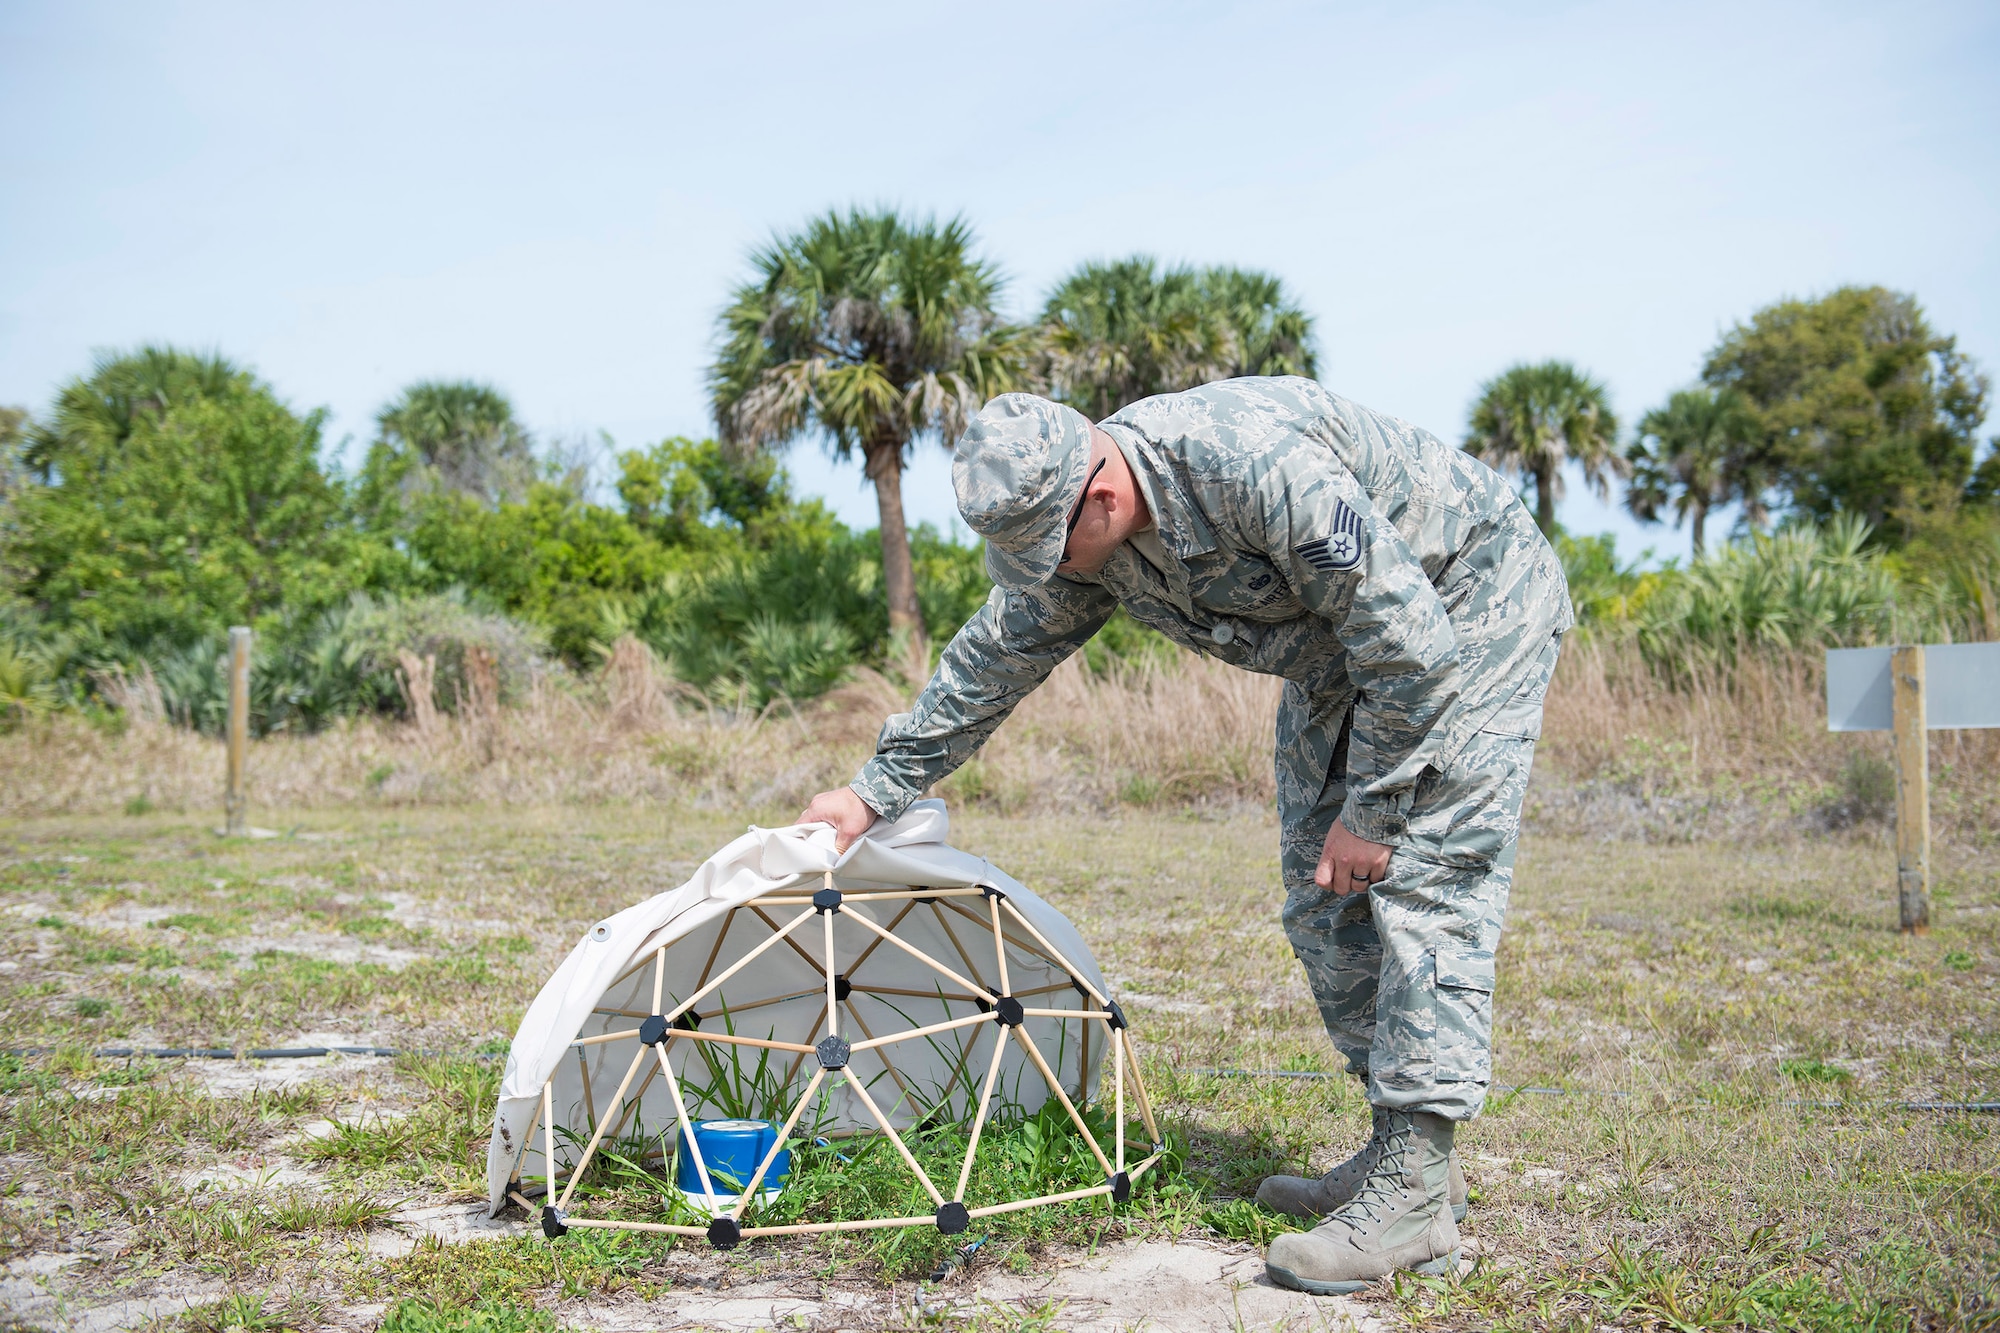 U.S. Air Force Staff Sgt. Derrick C. Johnson, a field test technician assigned to the Systems Development Directorate at the Air Force Technical Applications Center, Patrick Air Force Base, Florida, lifts the fabric from a small geodesic dome he developed to collect hydroacoustic data. (U.S. Air Force photo by Matthew S. Jurgens)